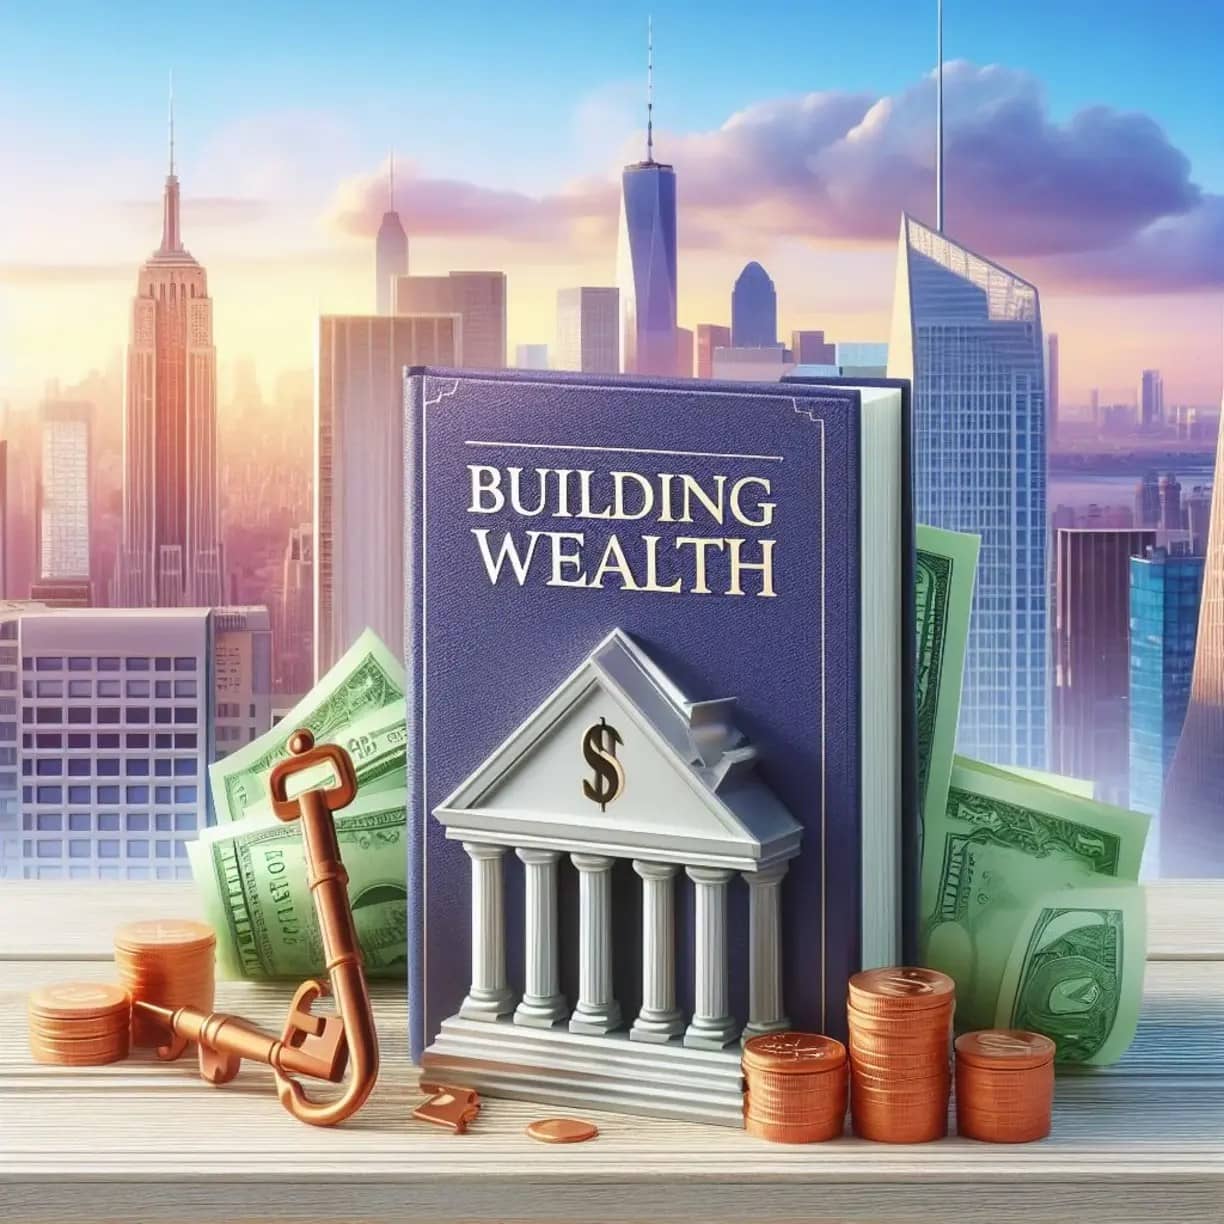 Building Wealth Habits: Your Roadmap to Financial Freedom with 5 Key-Pillars